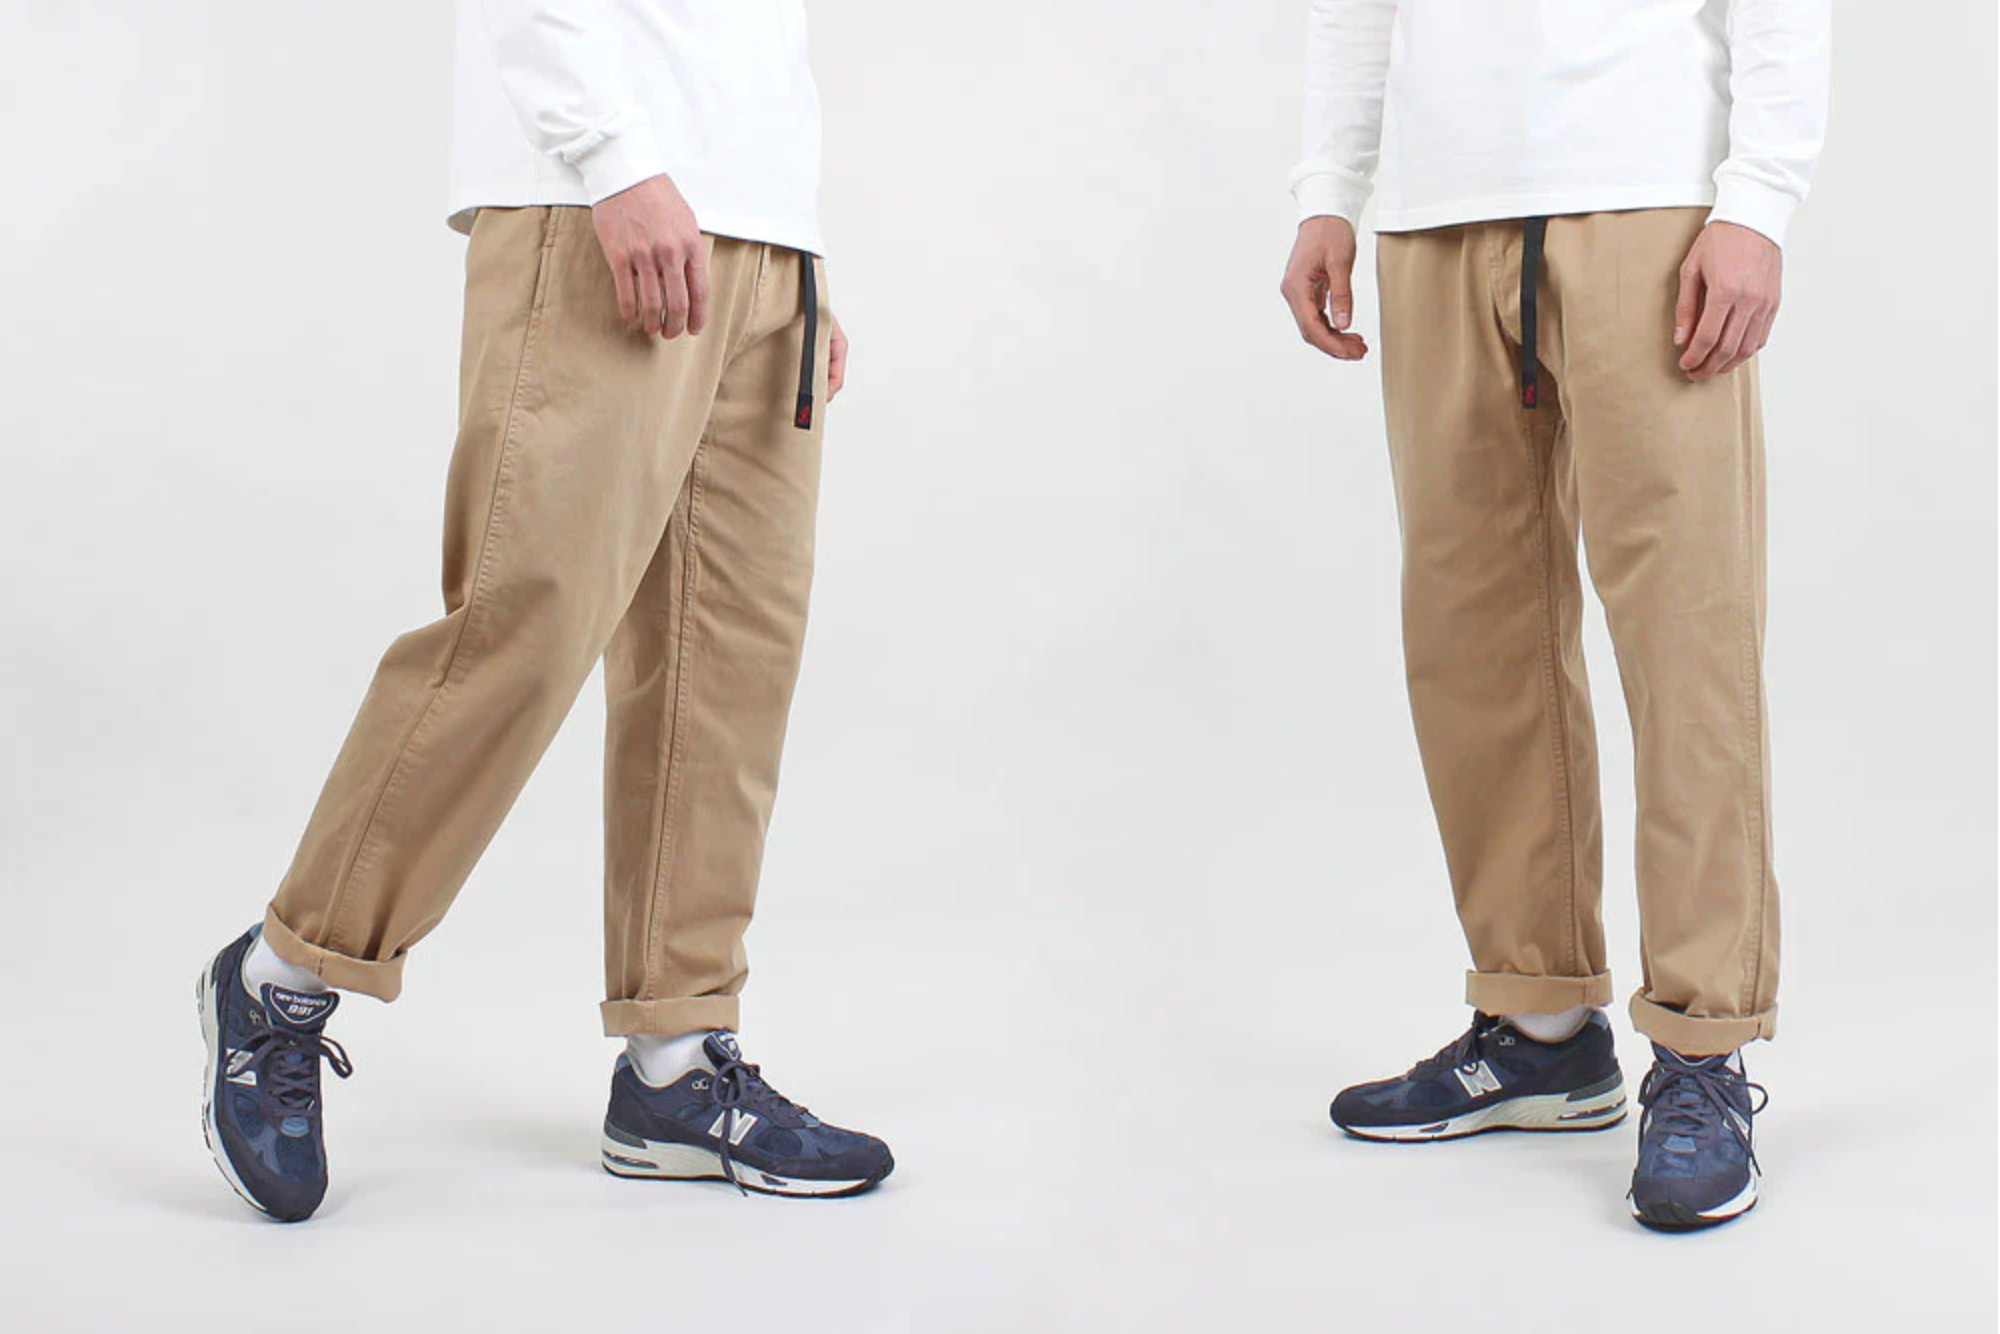 Chino & Khaki Pants Fit Guide - Men's Clothing Fit Guide 